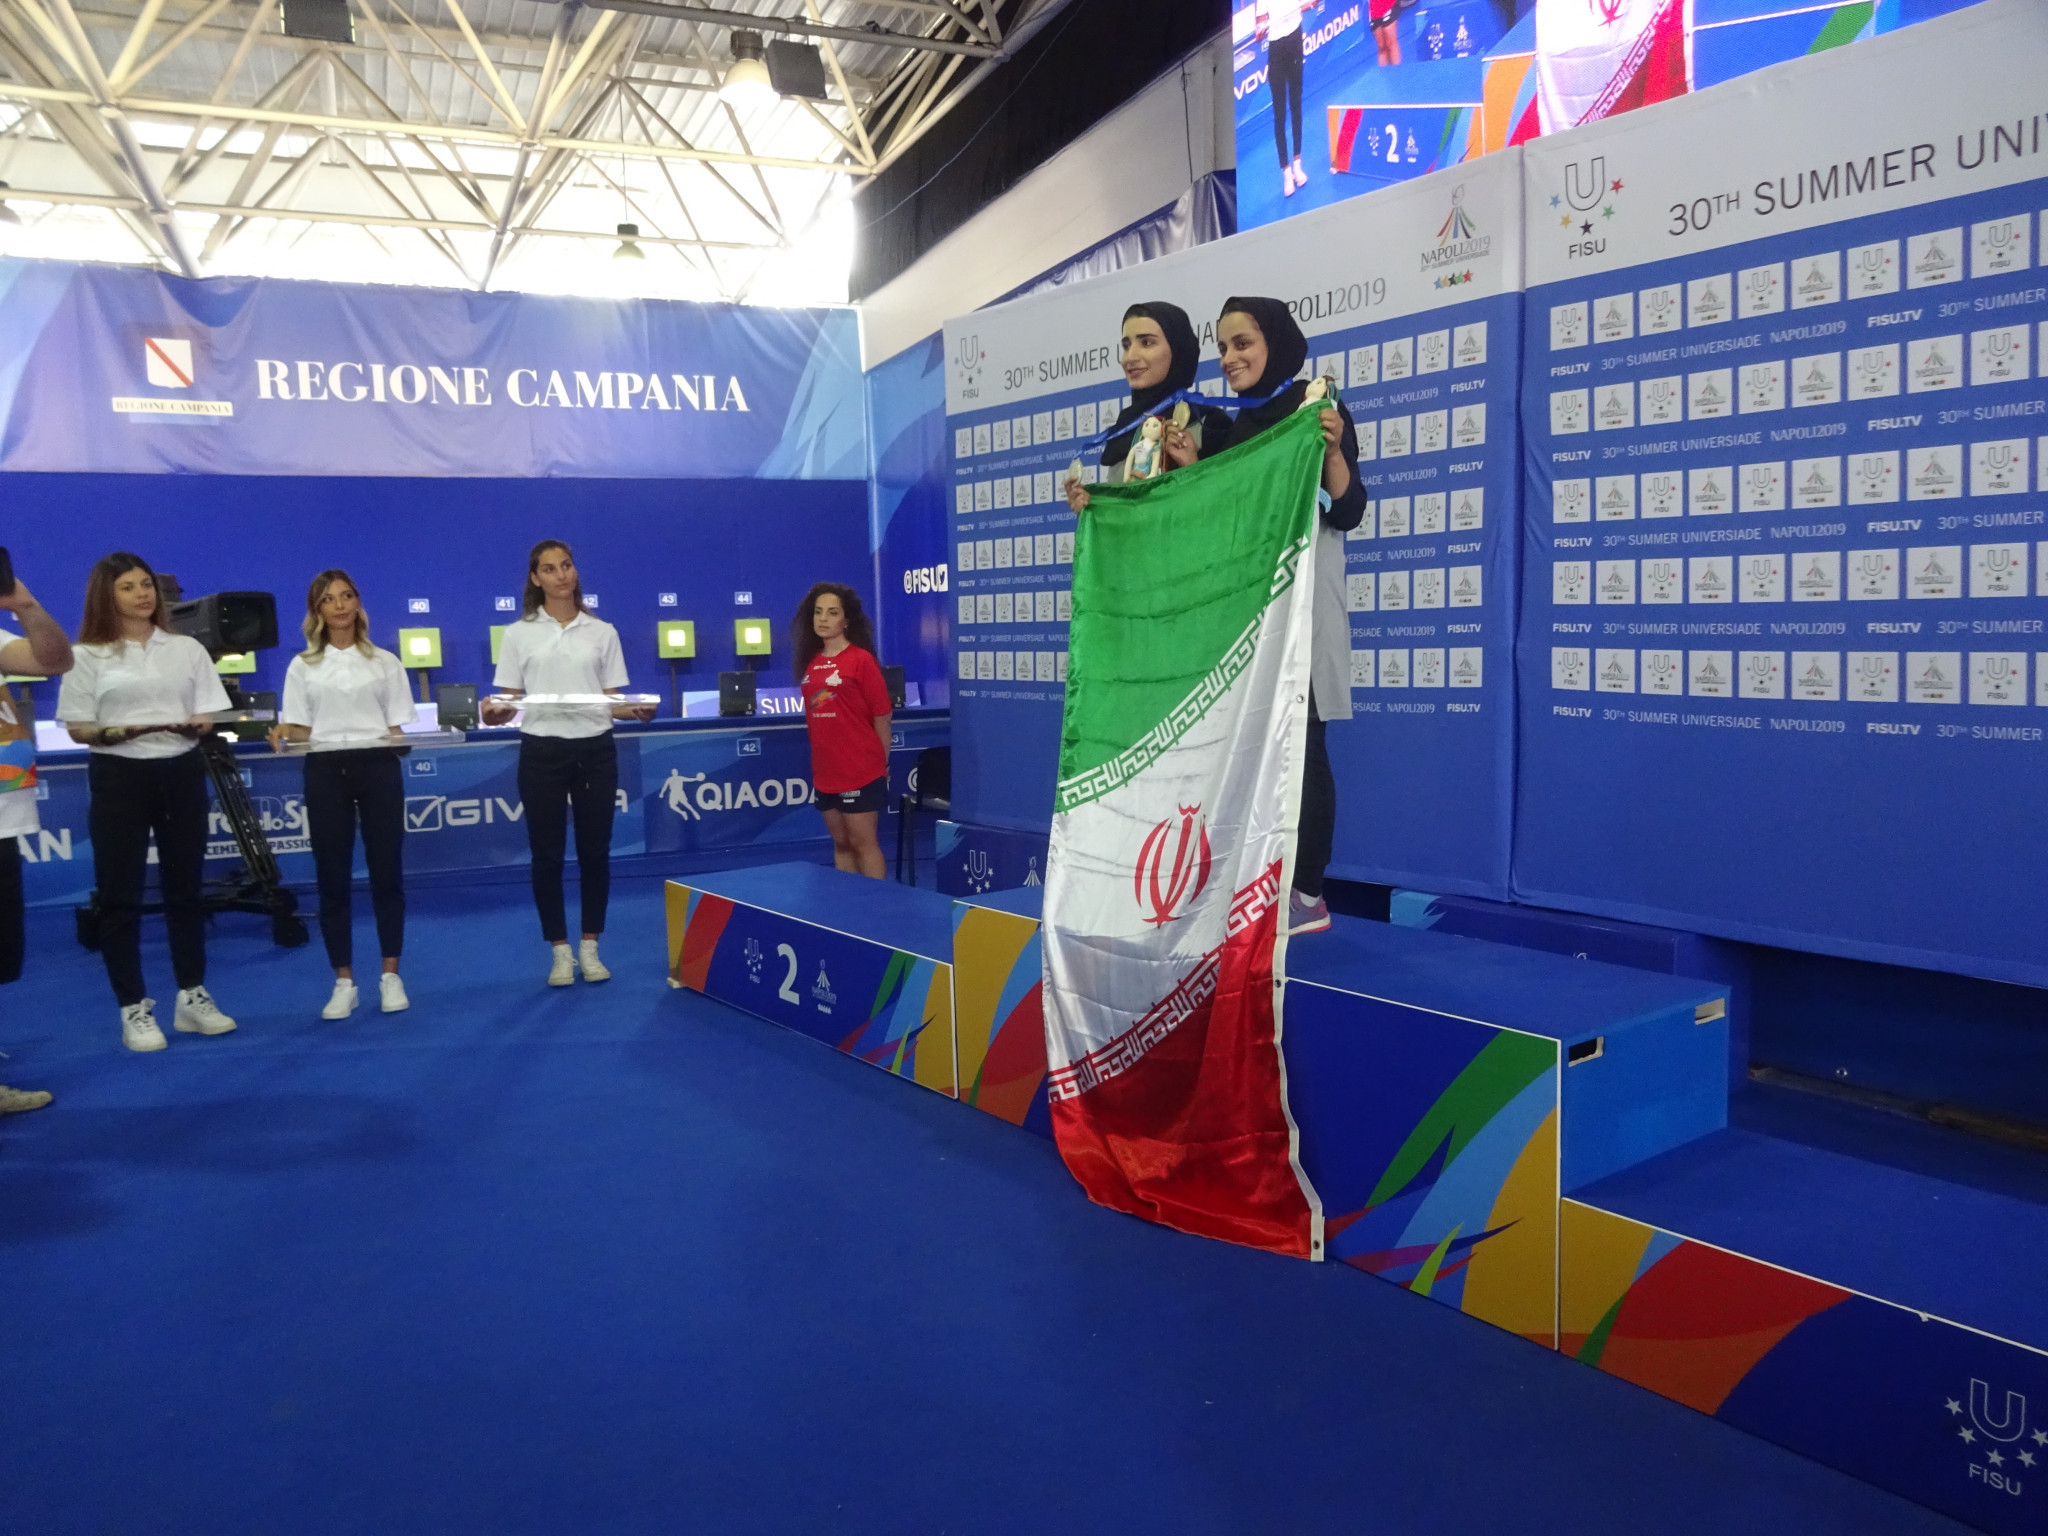 Iran claimed gold and silver in the women's 10m air pistol final at Mostra d'Oltremare ©Philip Barker